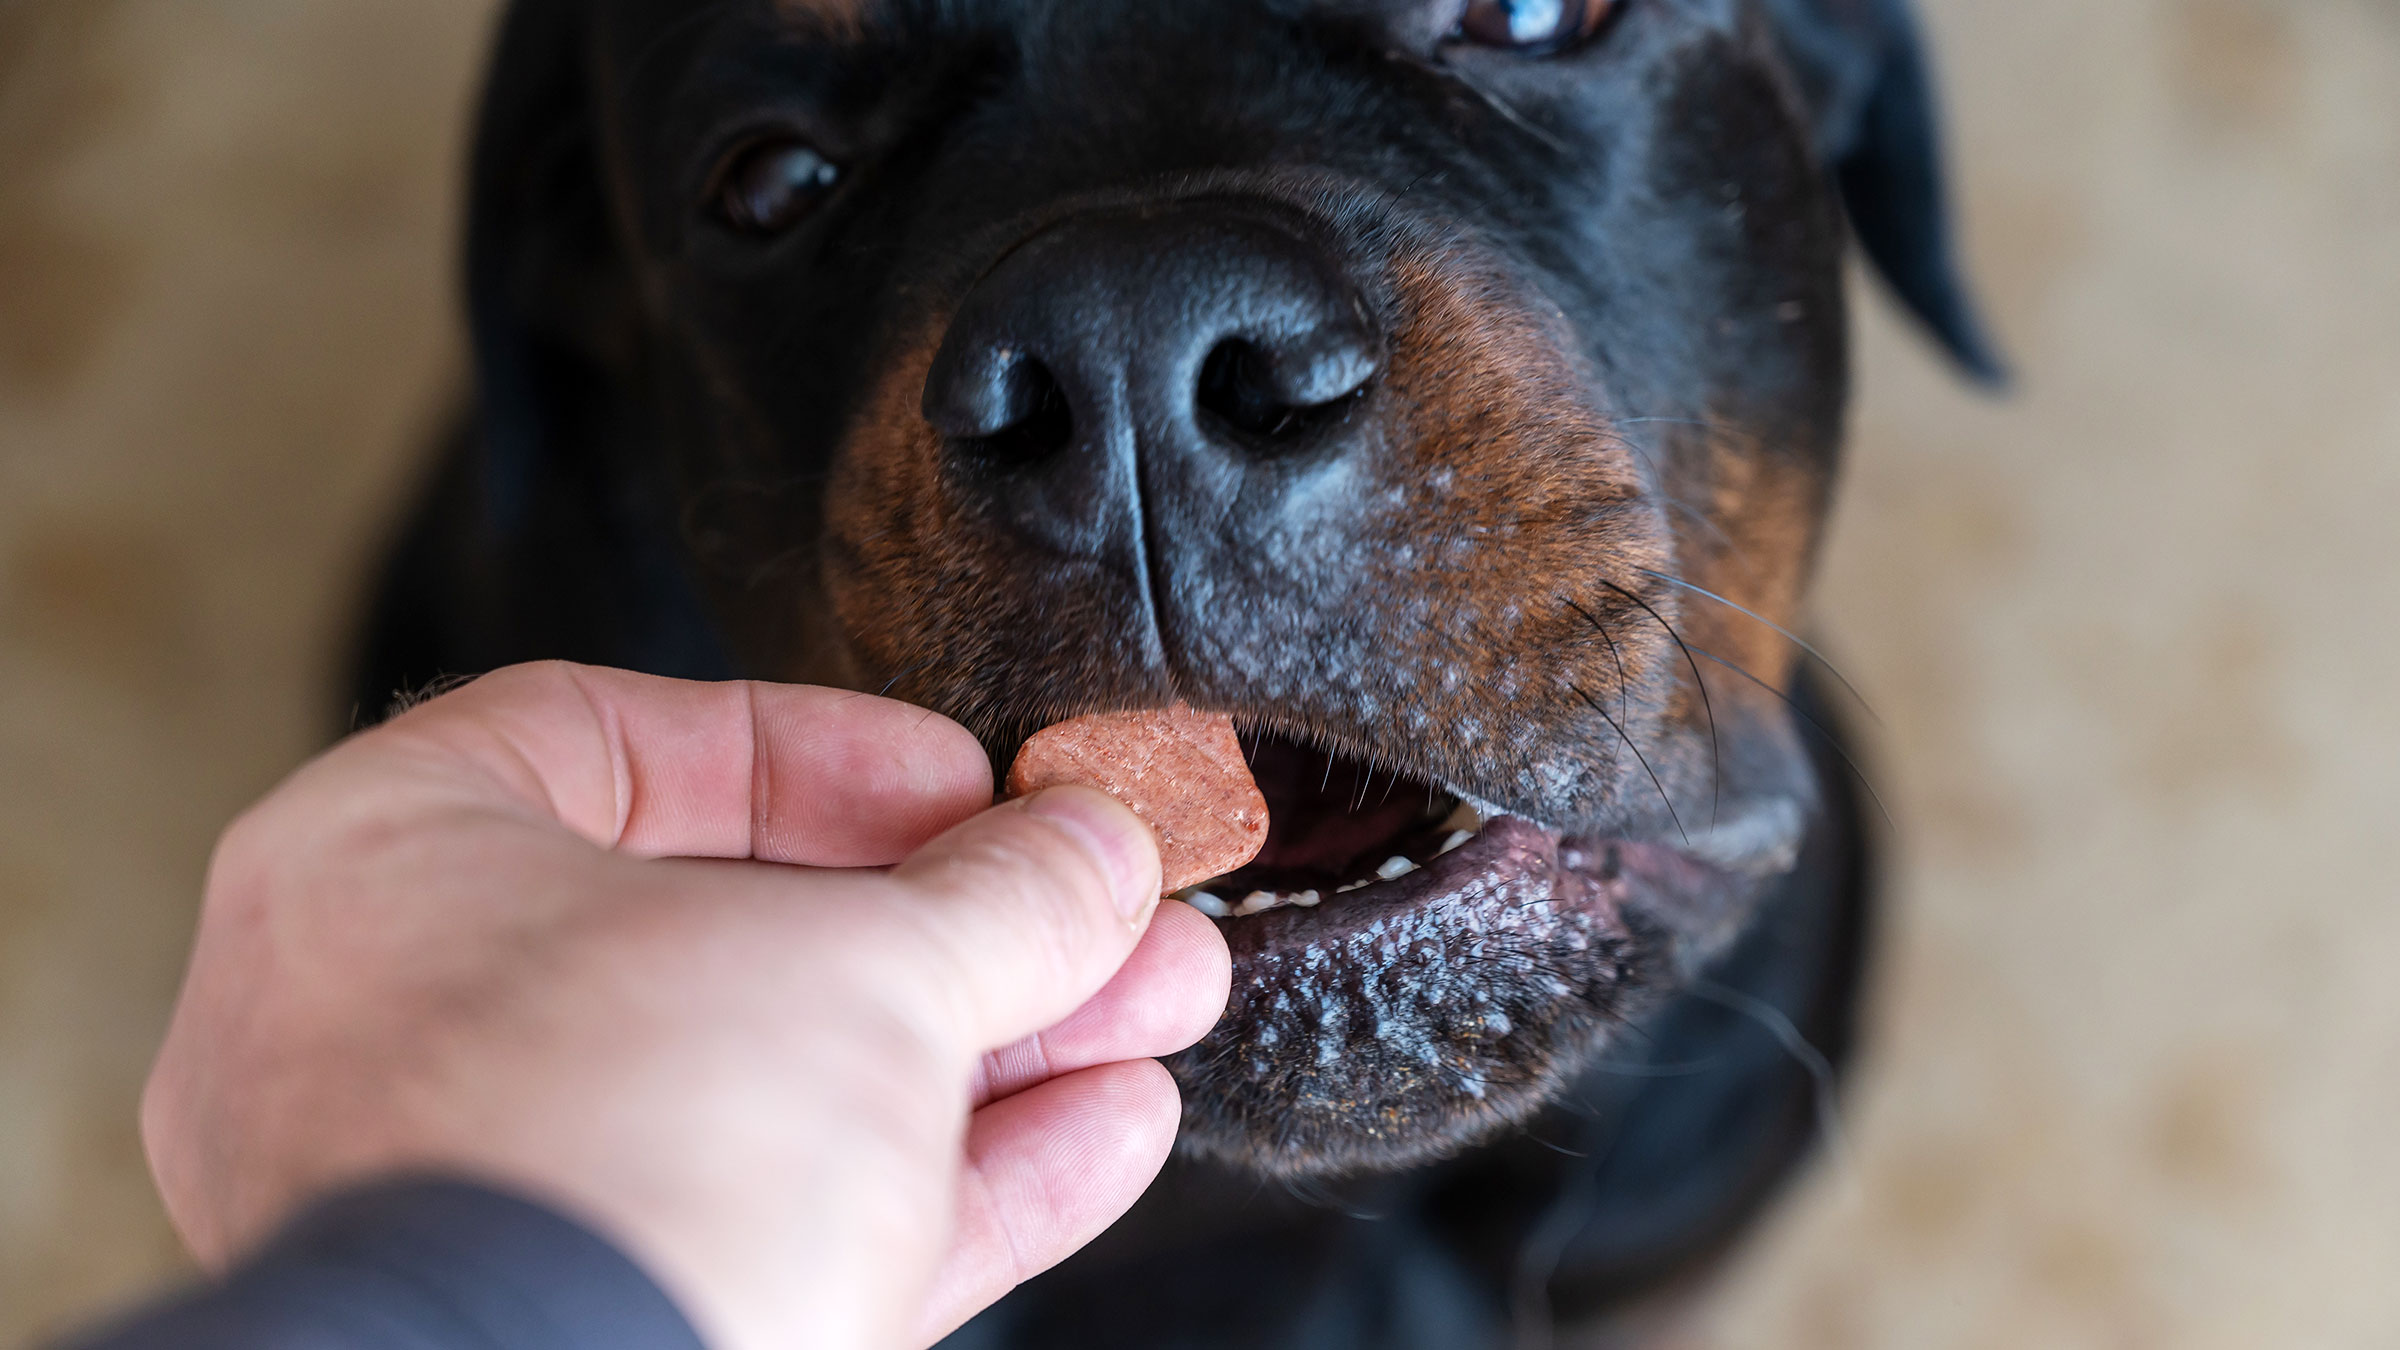 26 Common Foods and Liquids That Are Poisonous to Dogs - GoodRx